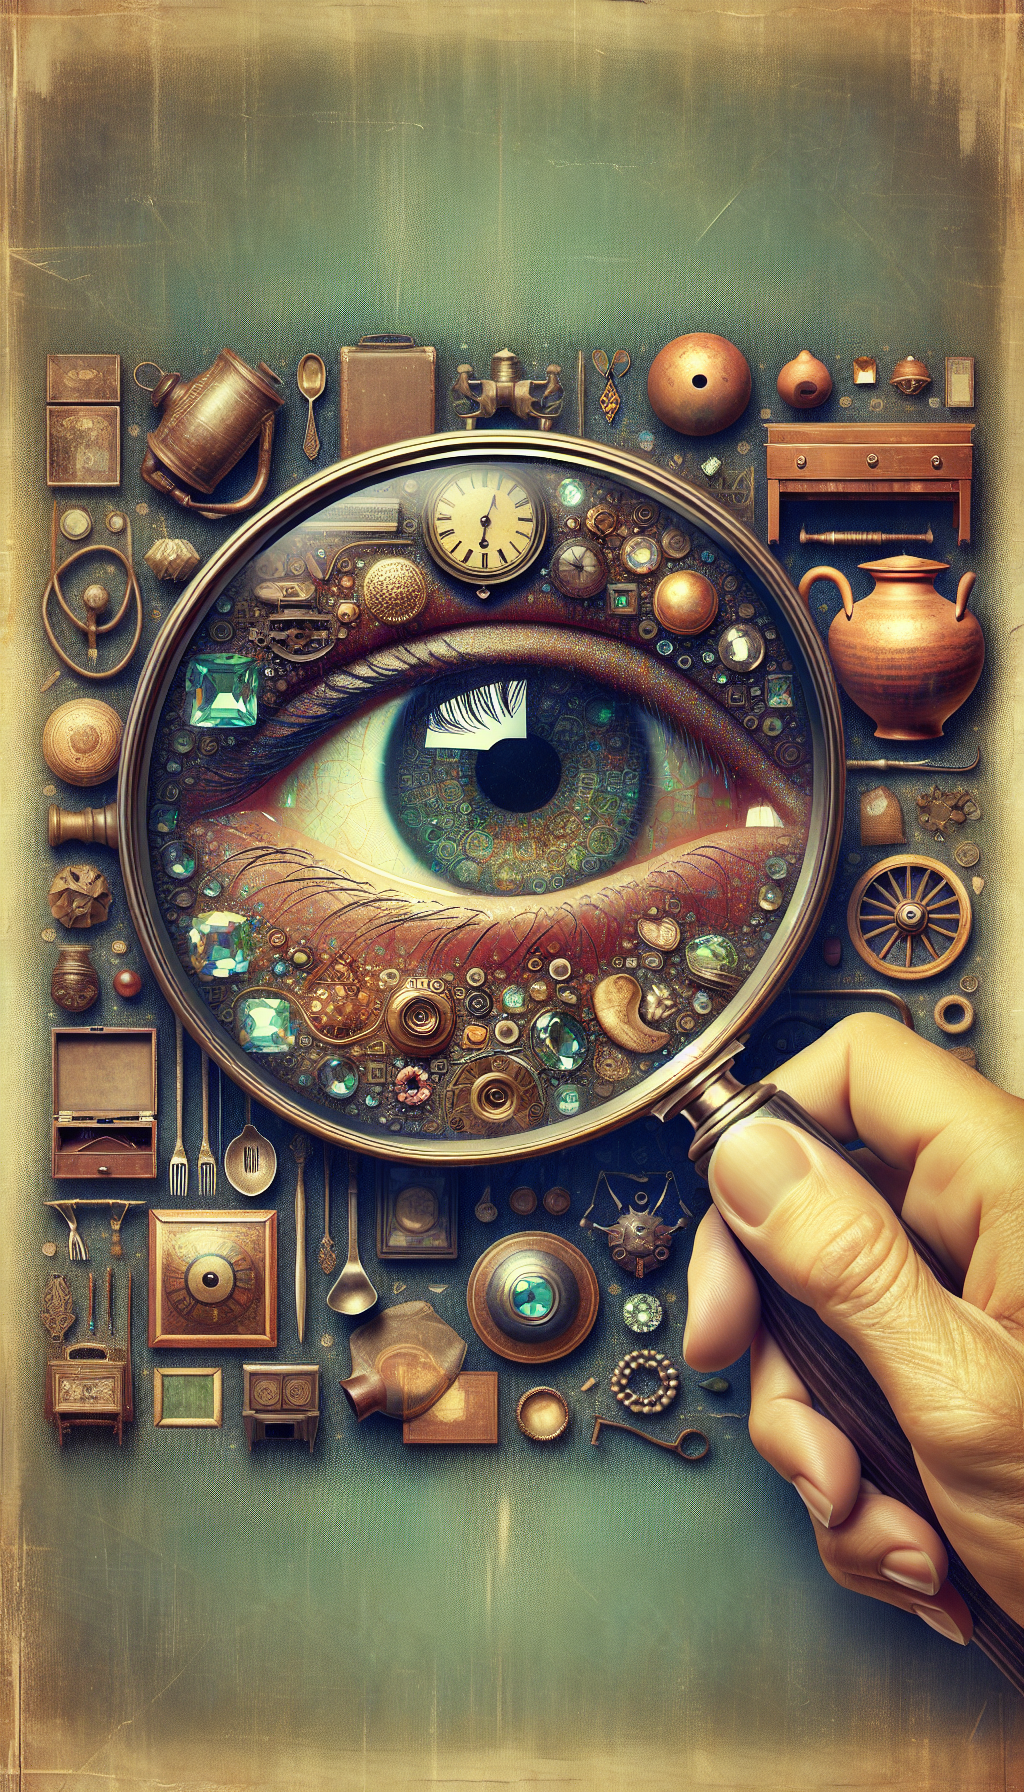 A vintage magnifying glass focusing on a collage of antique items—a clock, jewelry, and pottery—reveals shimmering, ethereal alphanumeric values superimposed on each piece, symbolizing their assessed worth. The magnifying handle and surrounding space morph into the appraiser's discerning eye, with the reflection of other antiques awaiting evaluation in the pupil, weaving the human element with the art of valuation.